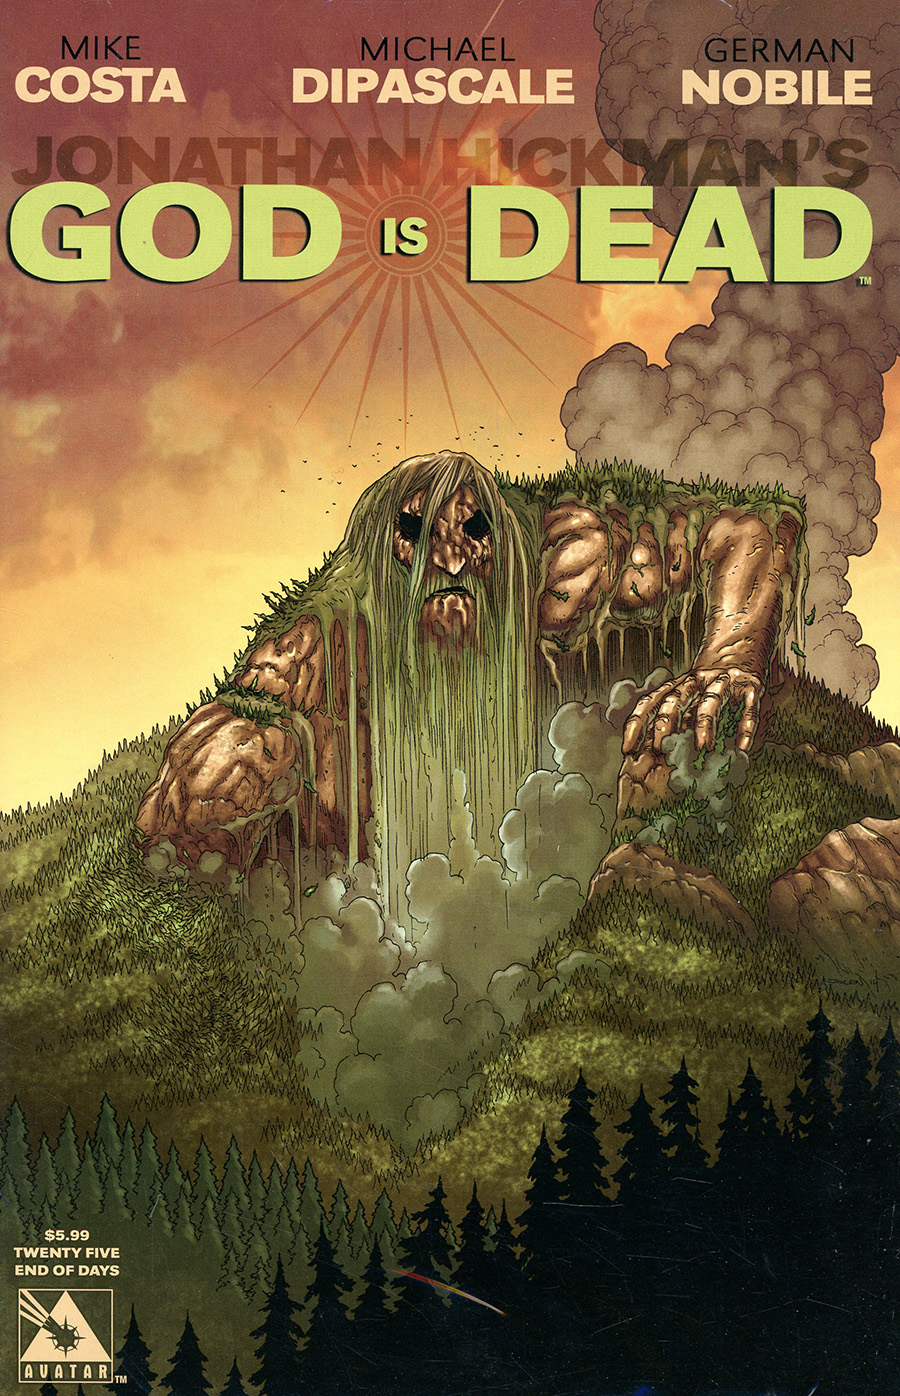 God Is Dead 25-30 End Of Days Covers Bag Set (6-Count)